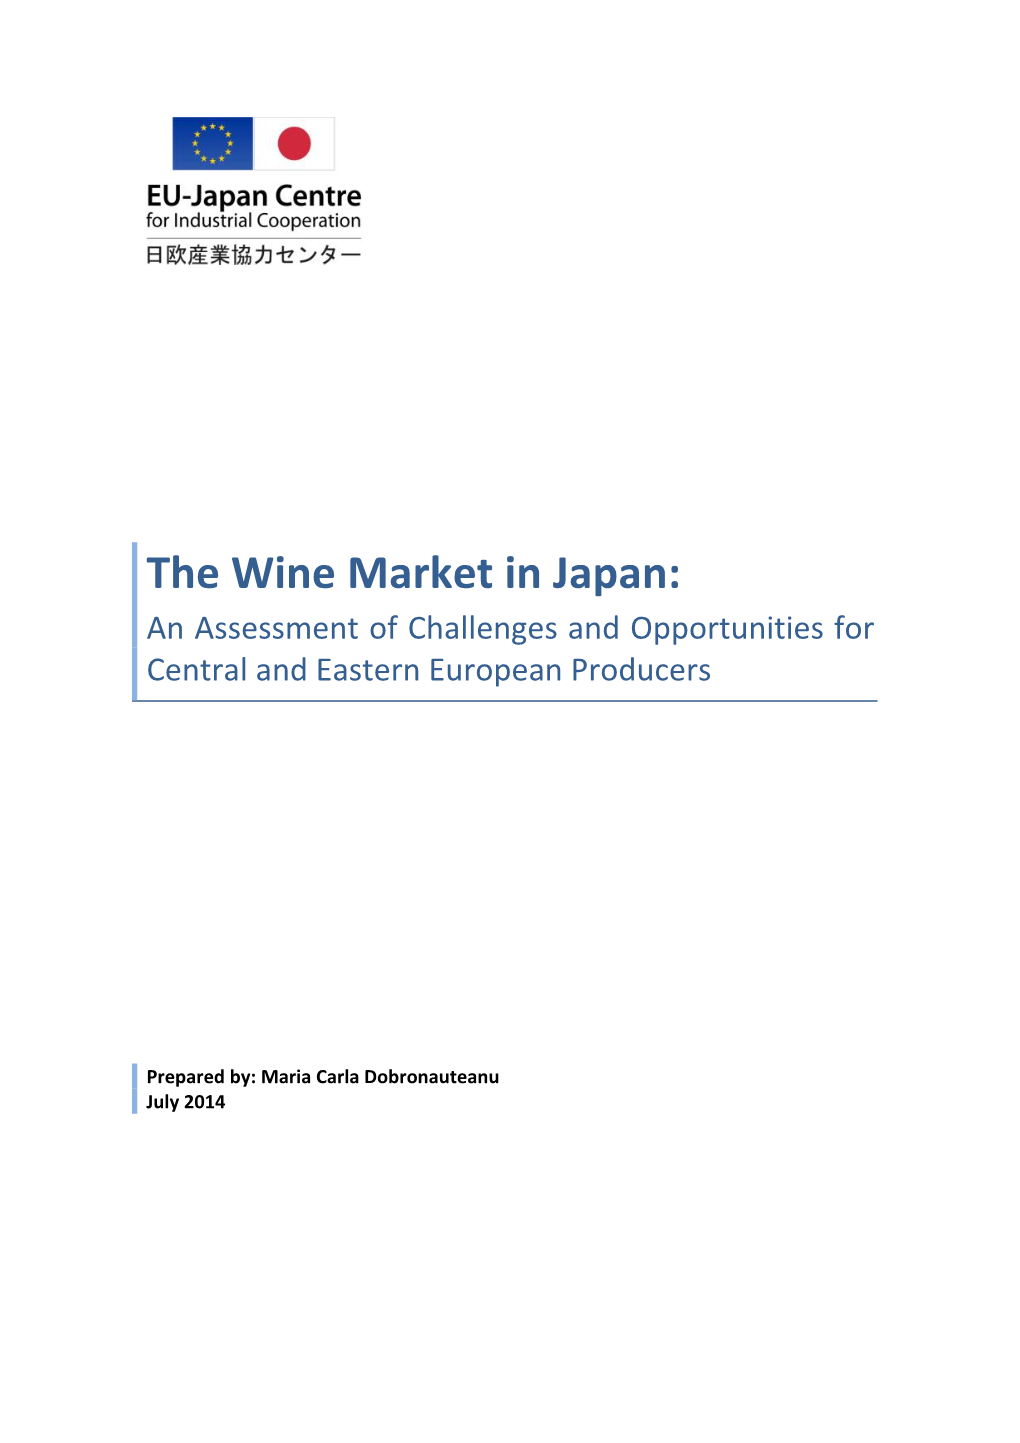 The Wine Market in Japan: an Assessment of Challenges and Opportunities for Central and Eastern European Producers